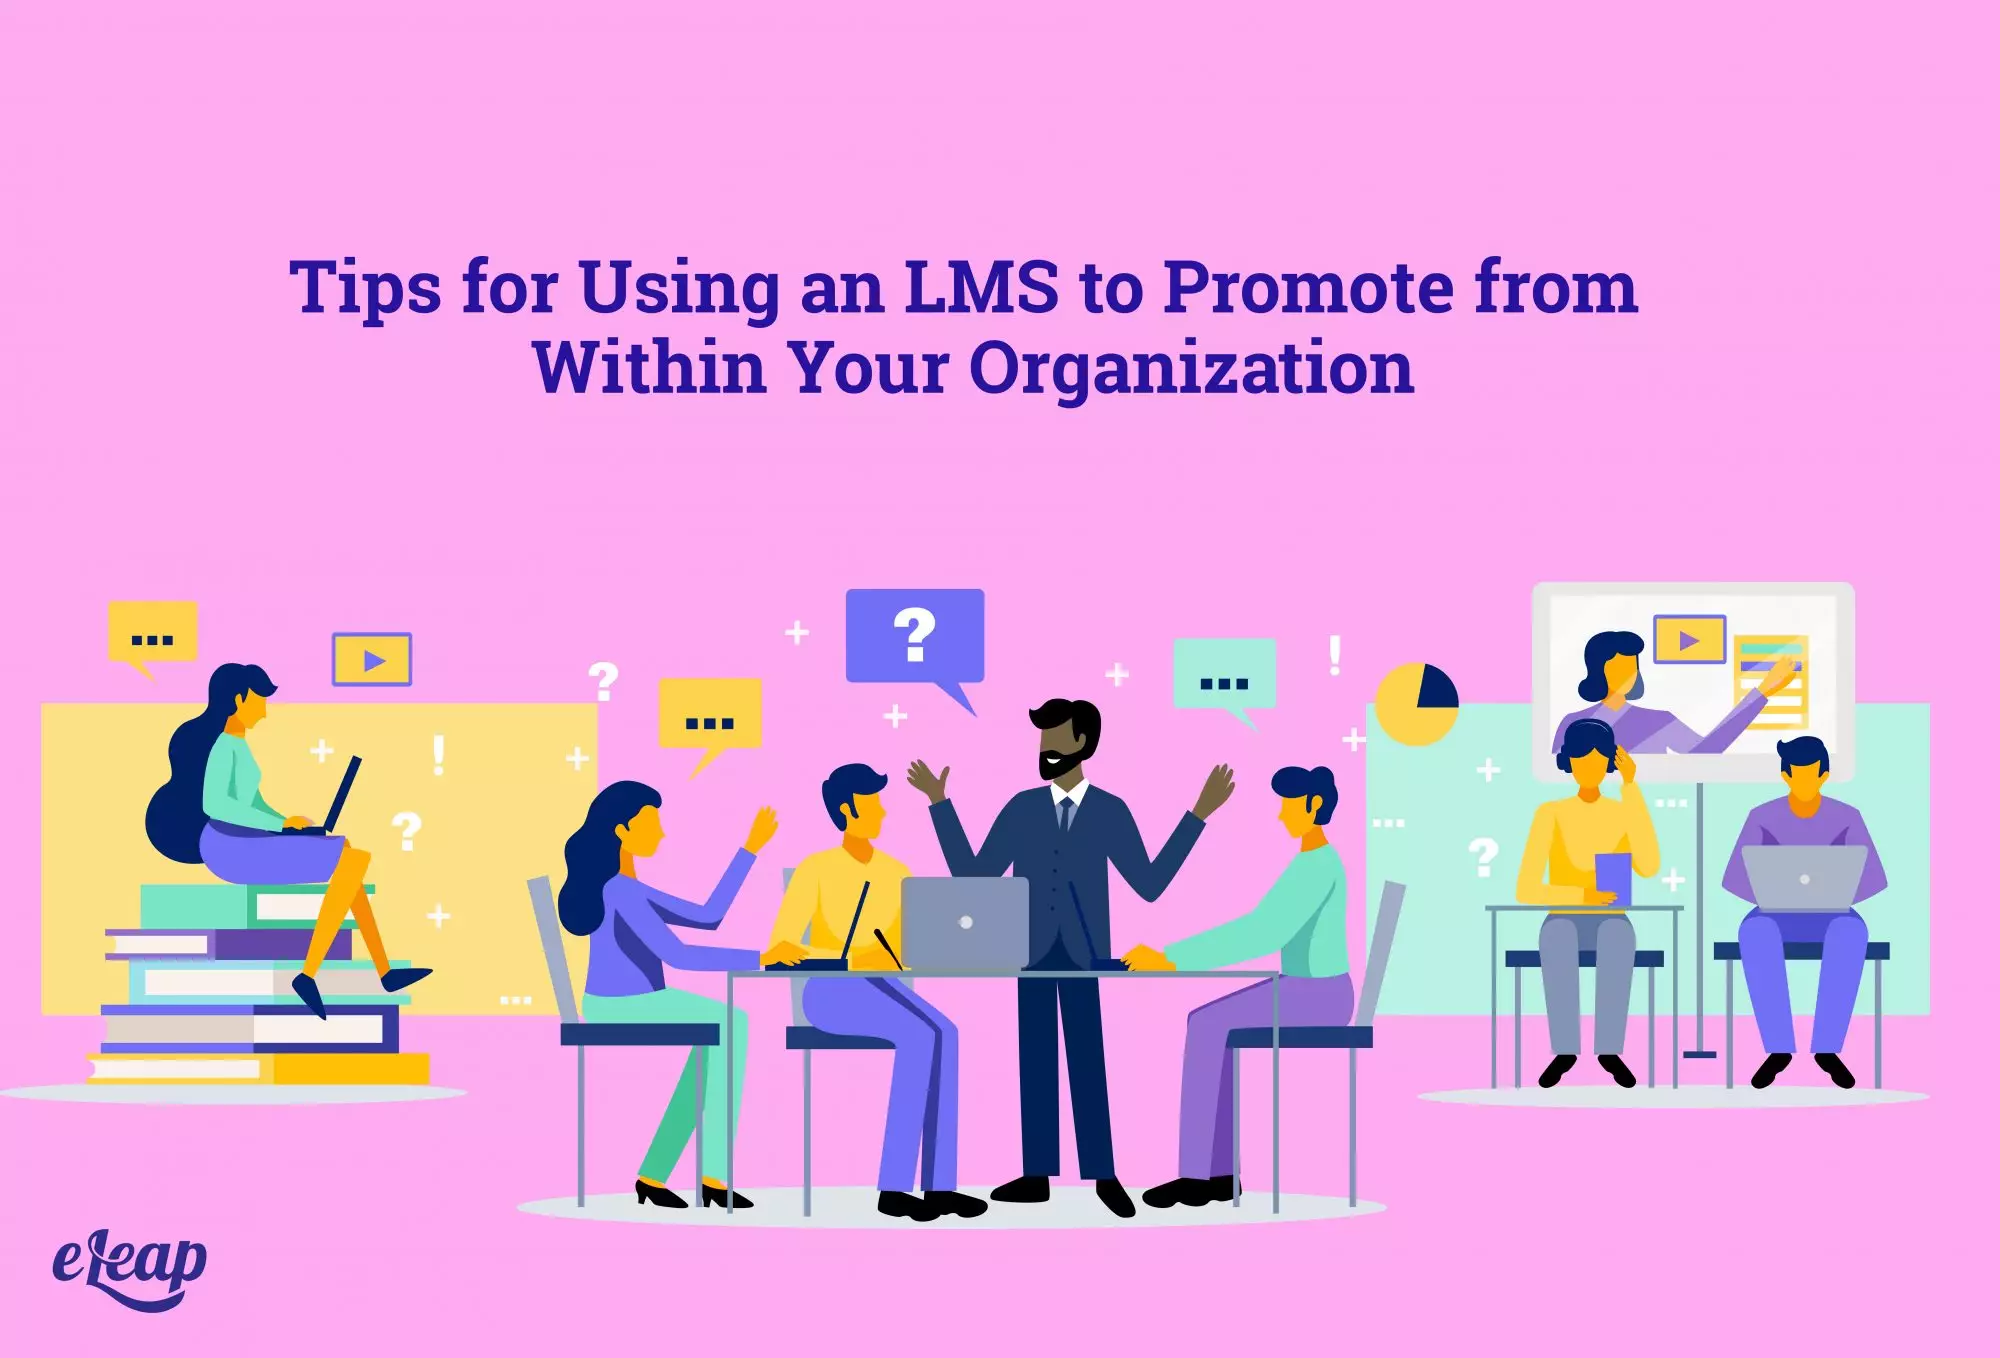 Tips for Using an LMS to Promote from Within Your Organization